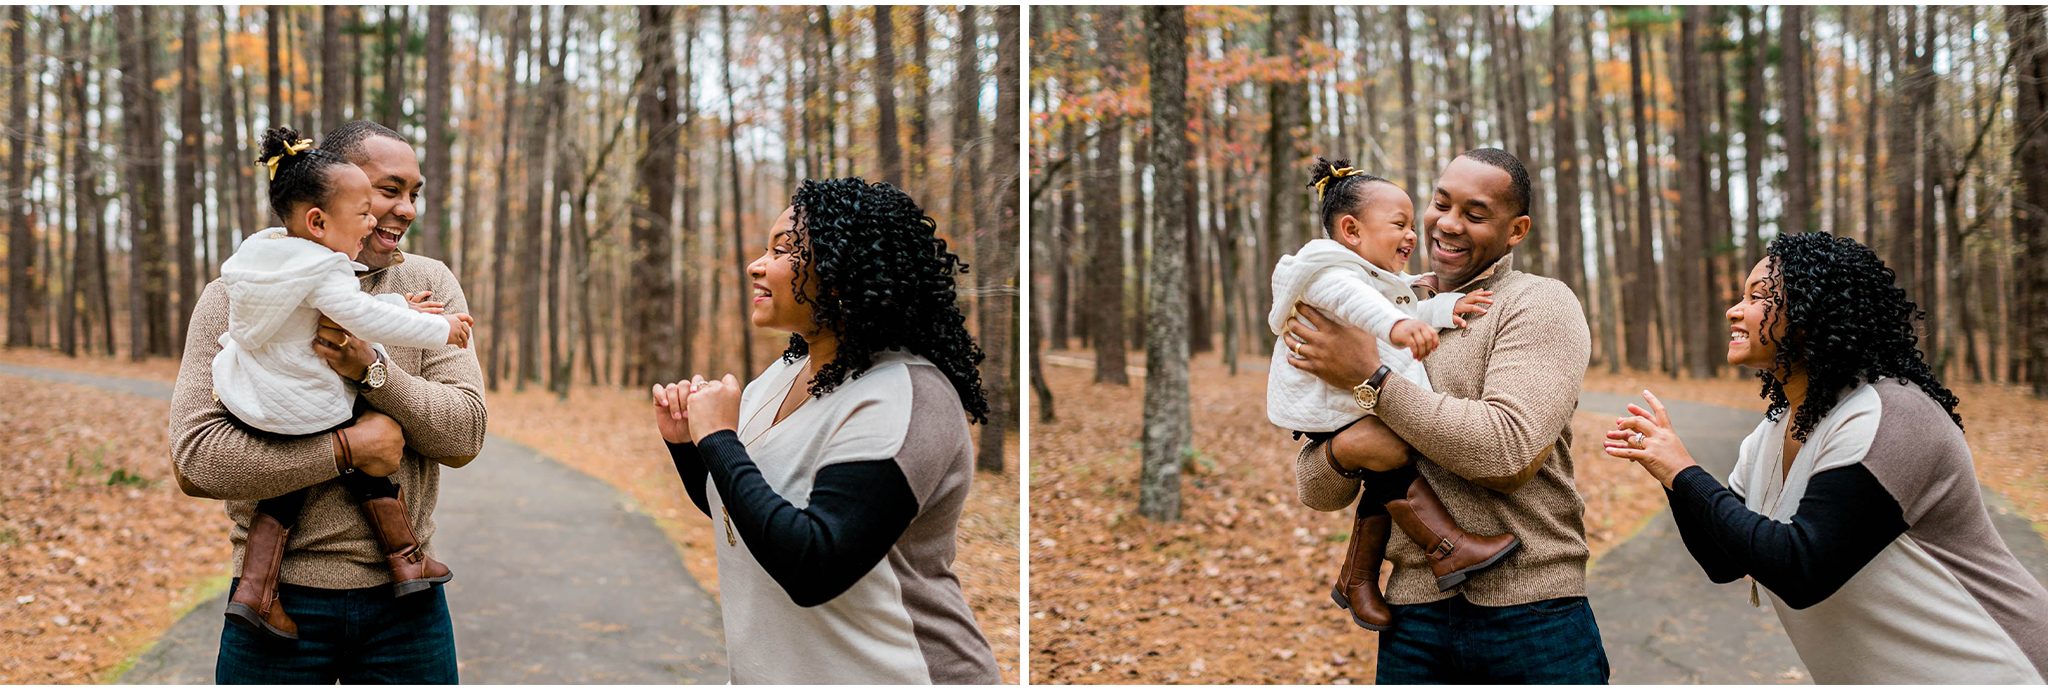 Raleigh-Family-Photographer-Umstead-Park-Blog1.png